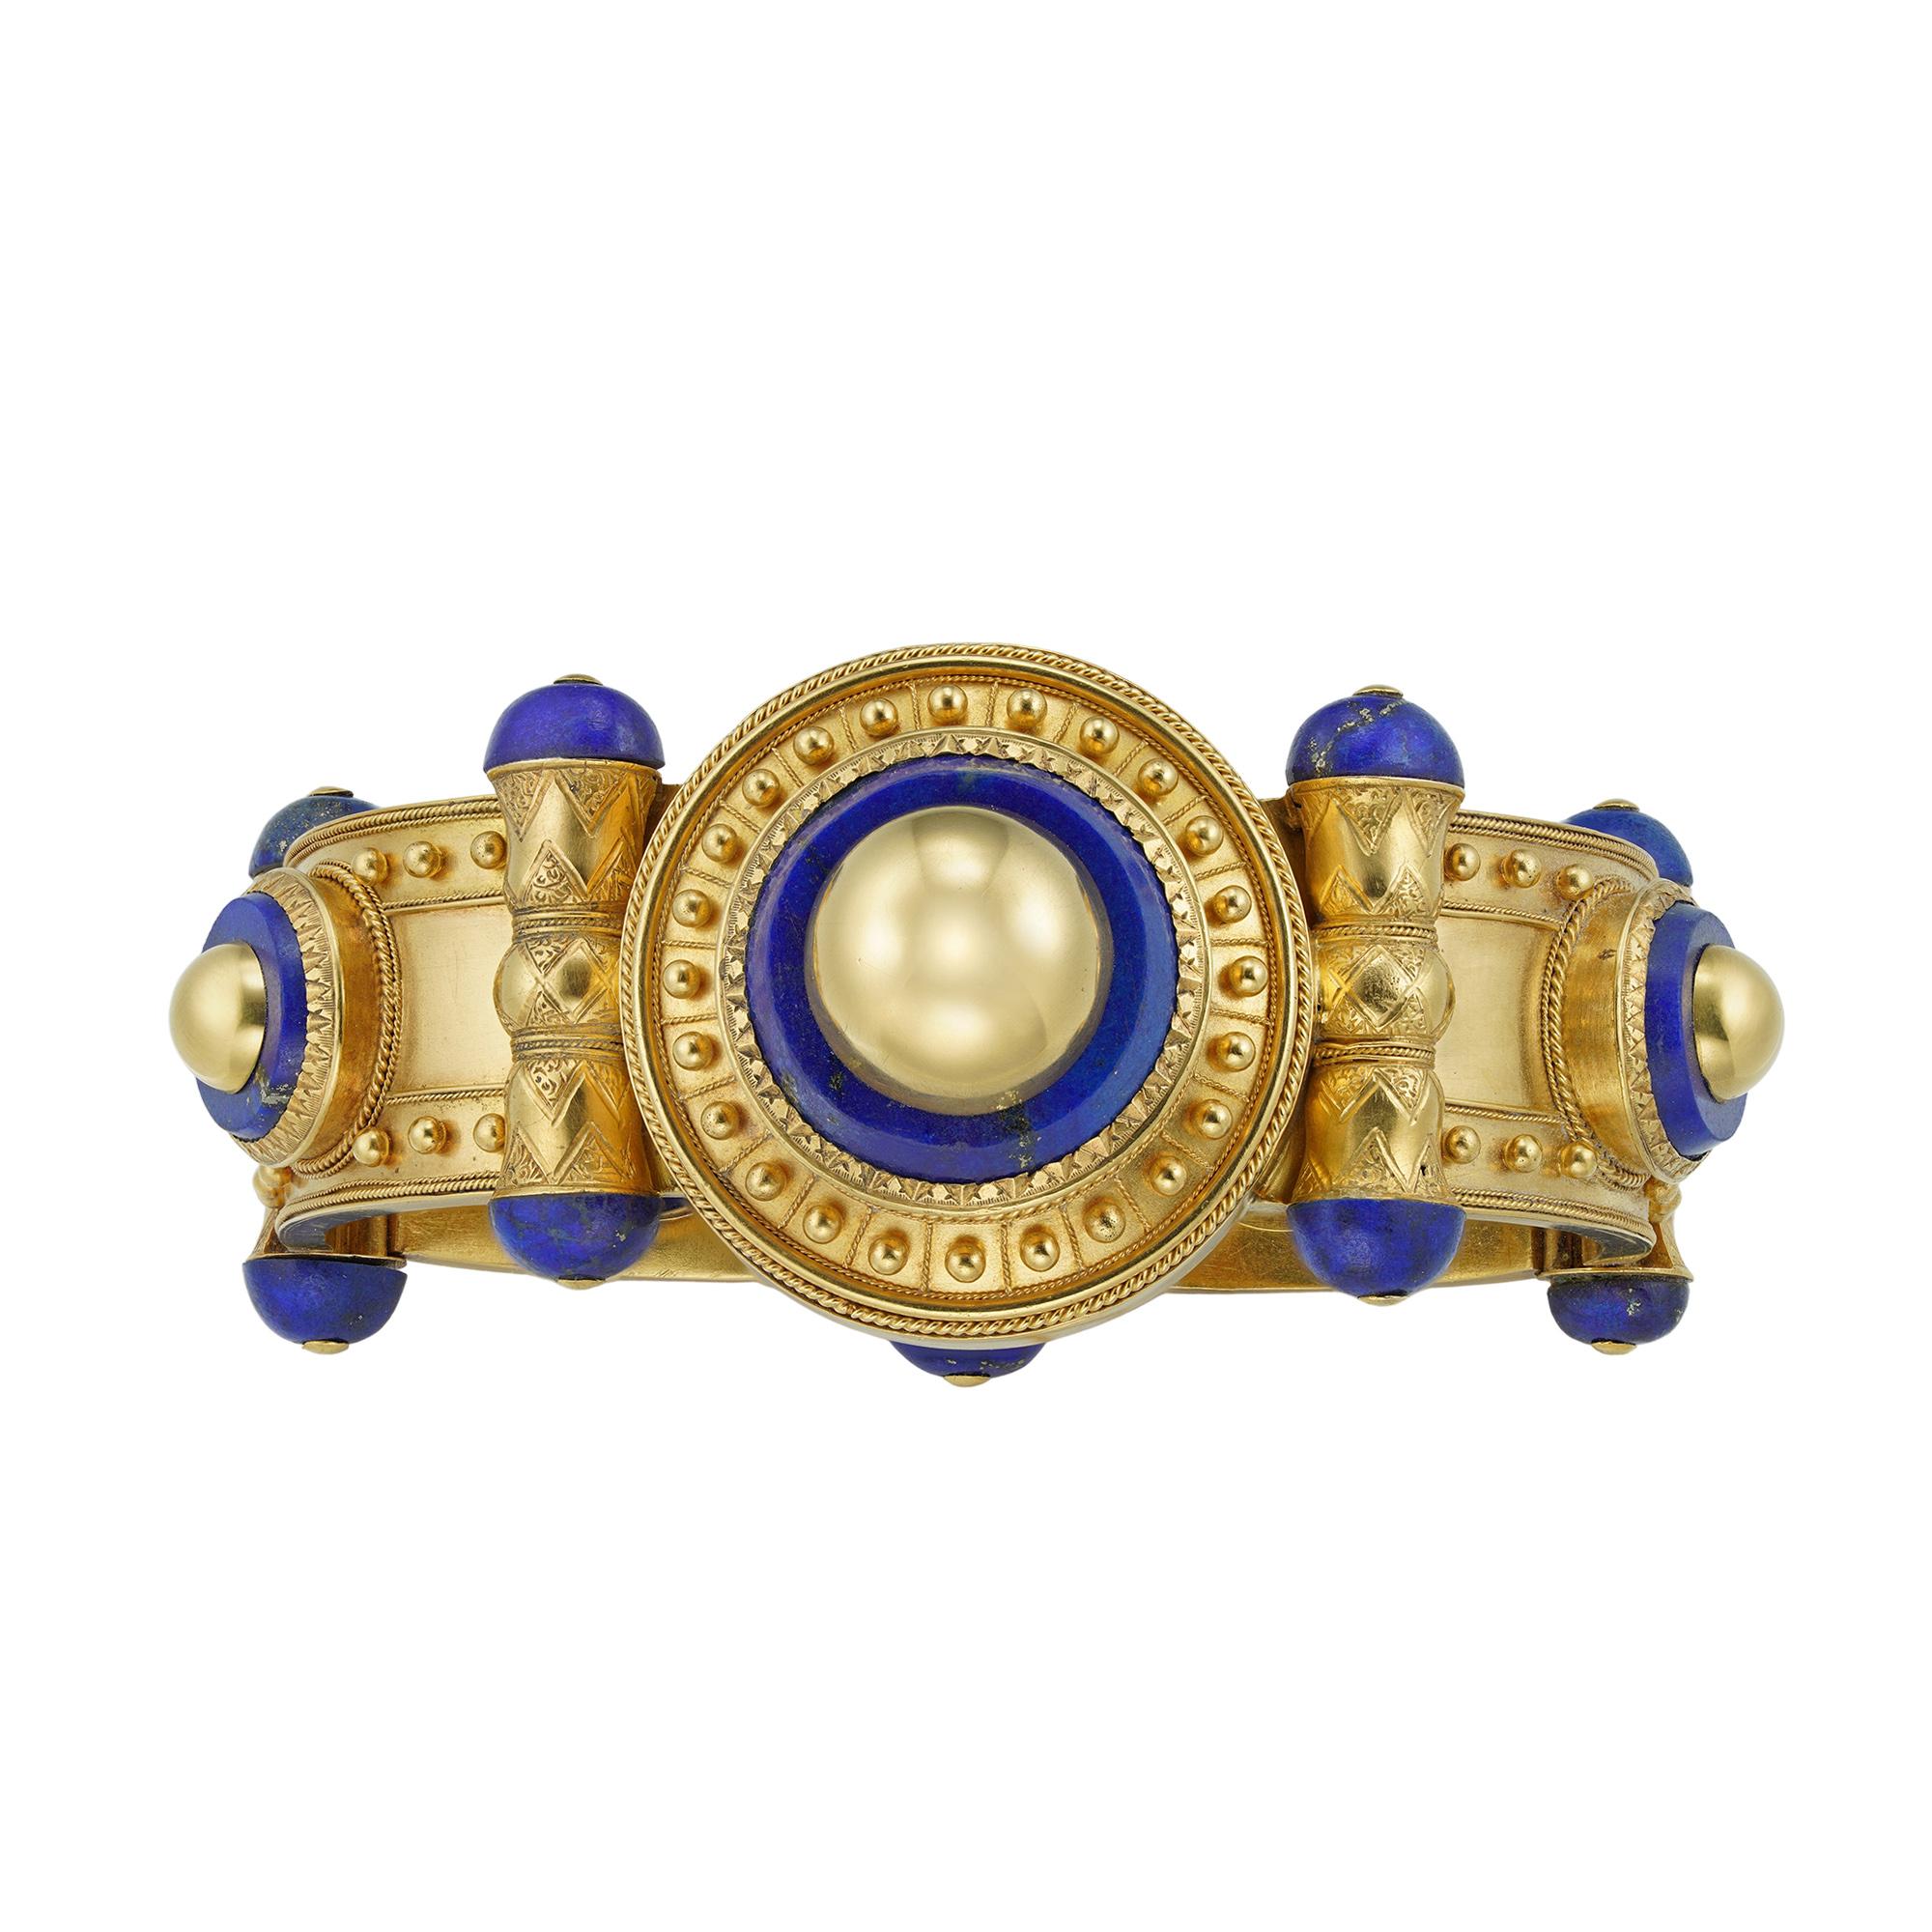 Etruscan Revival Important Gold and Lapis Bangle by Cartier